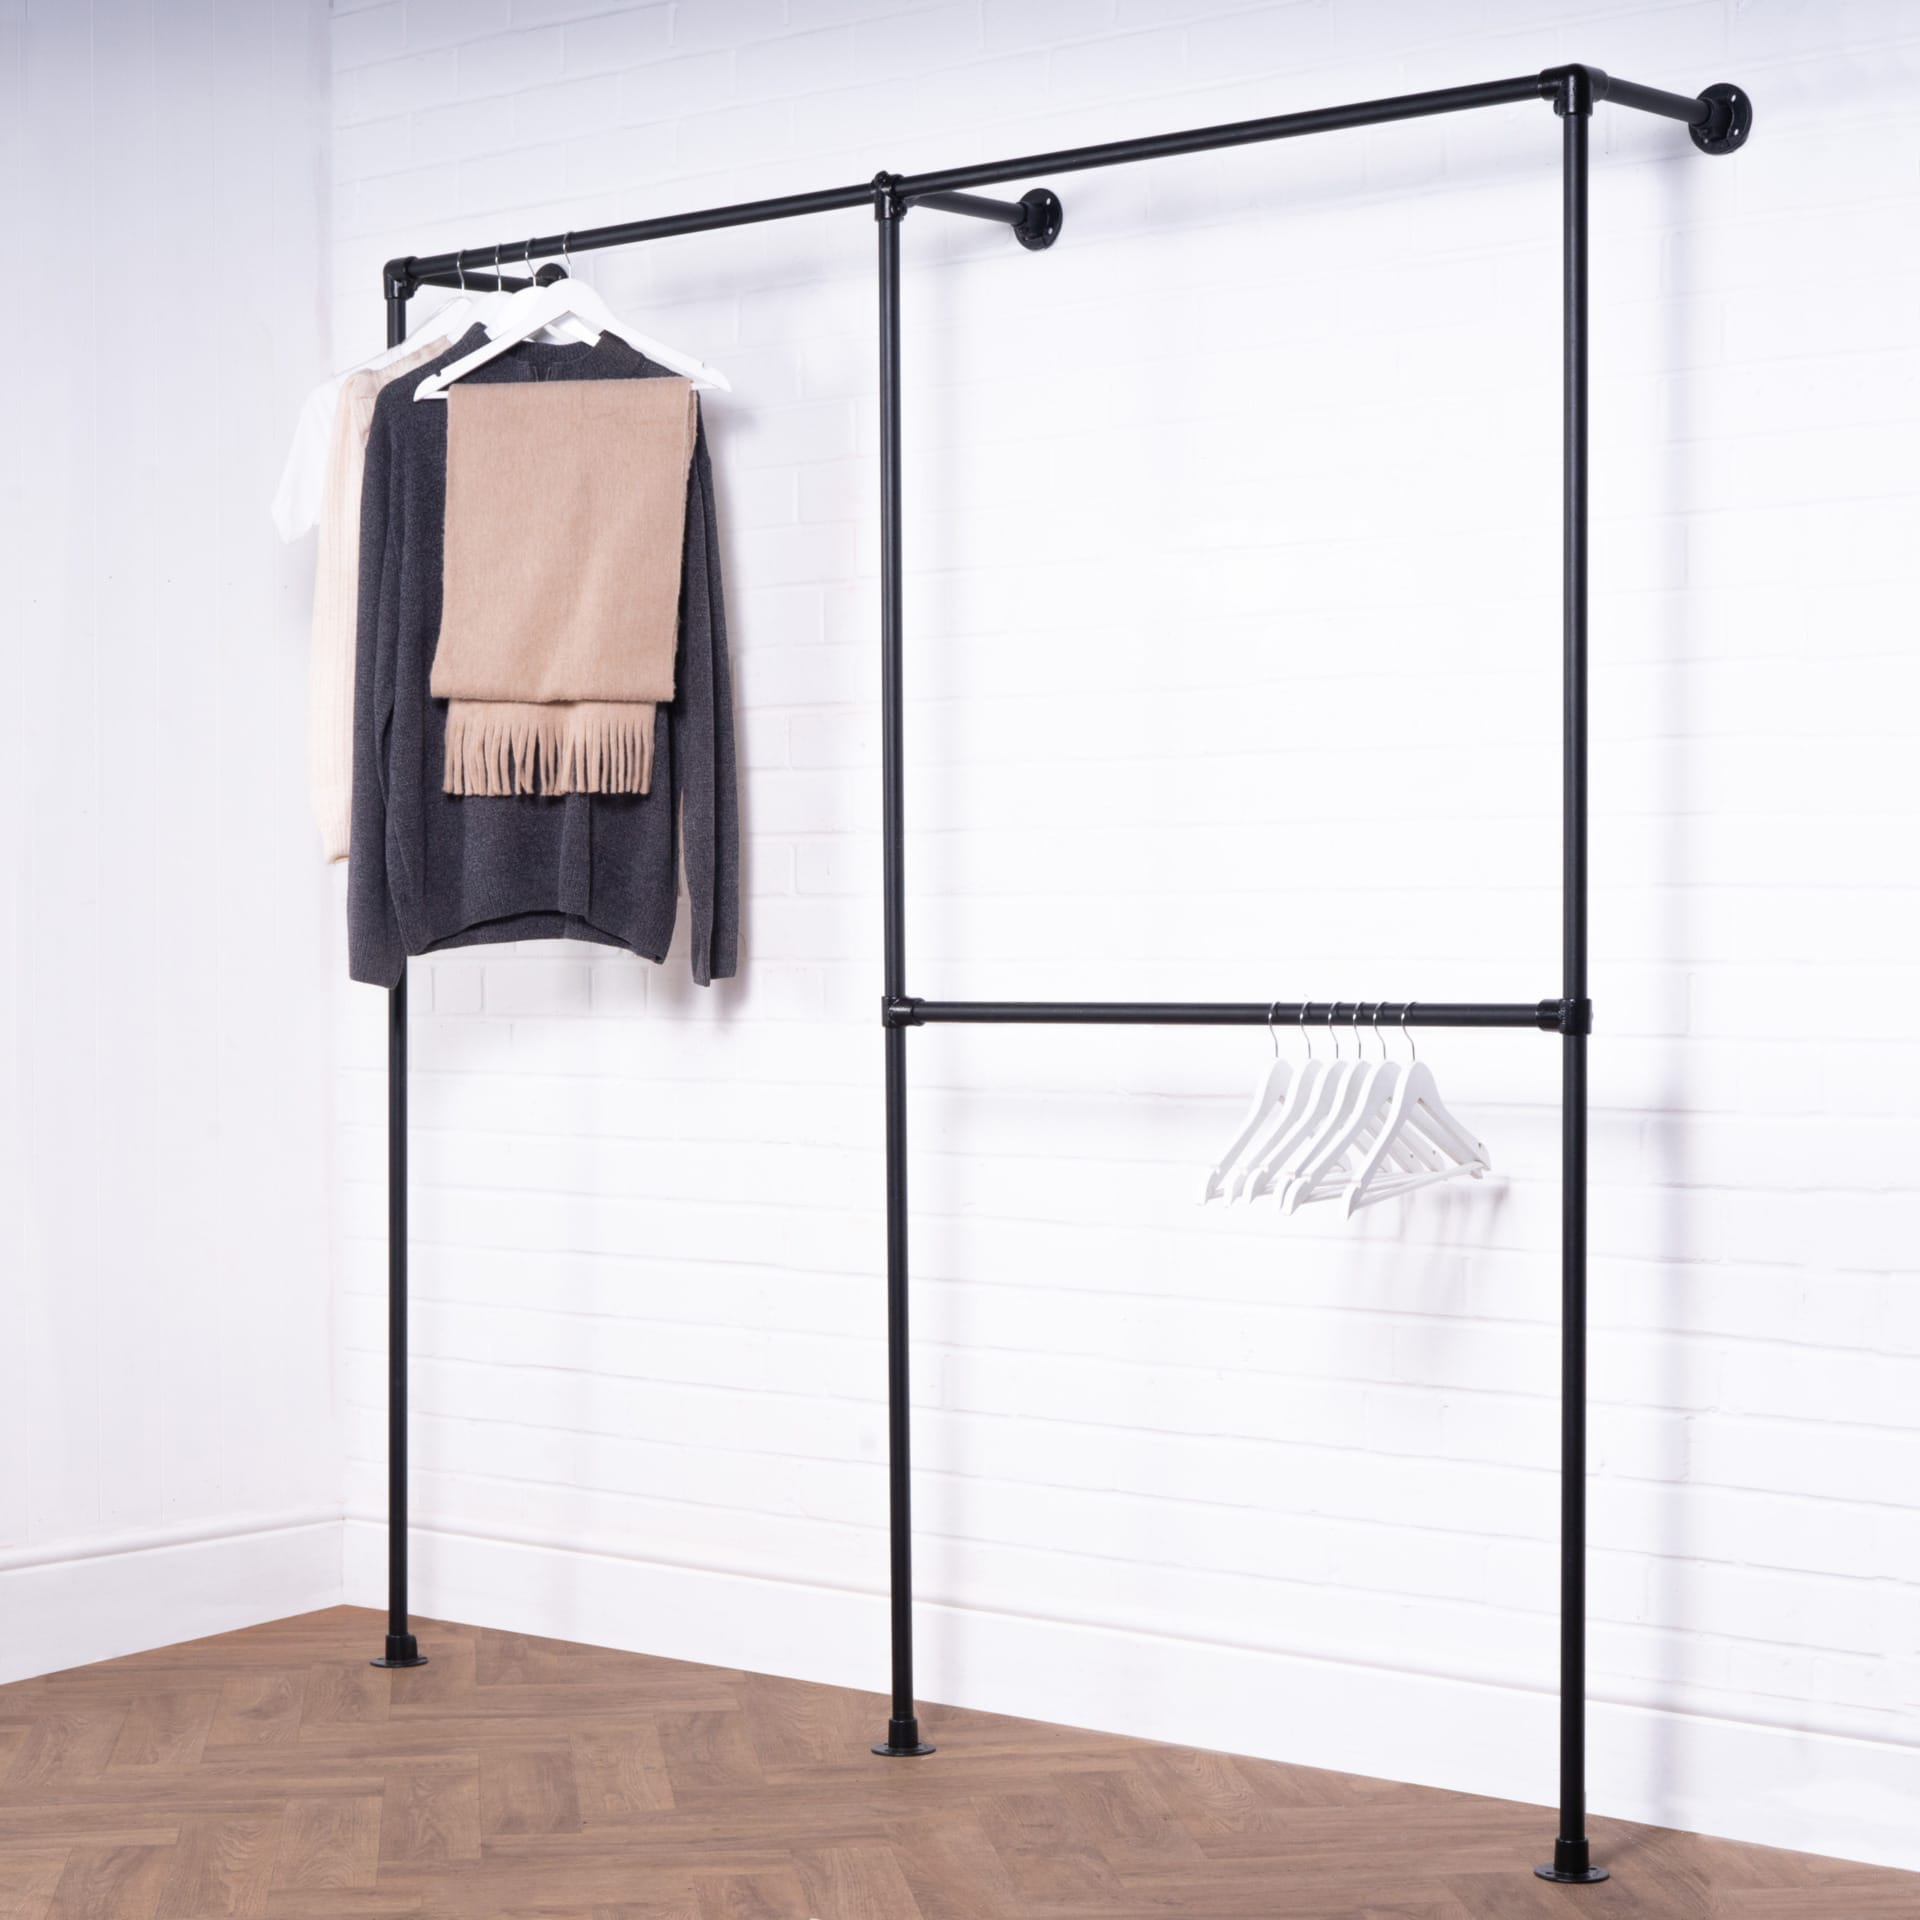 Full Height and Double Level Key Clamp Clothing Rail | Industrial ...